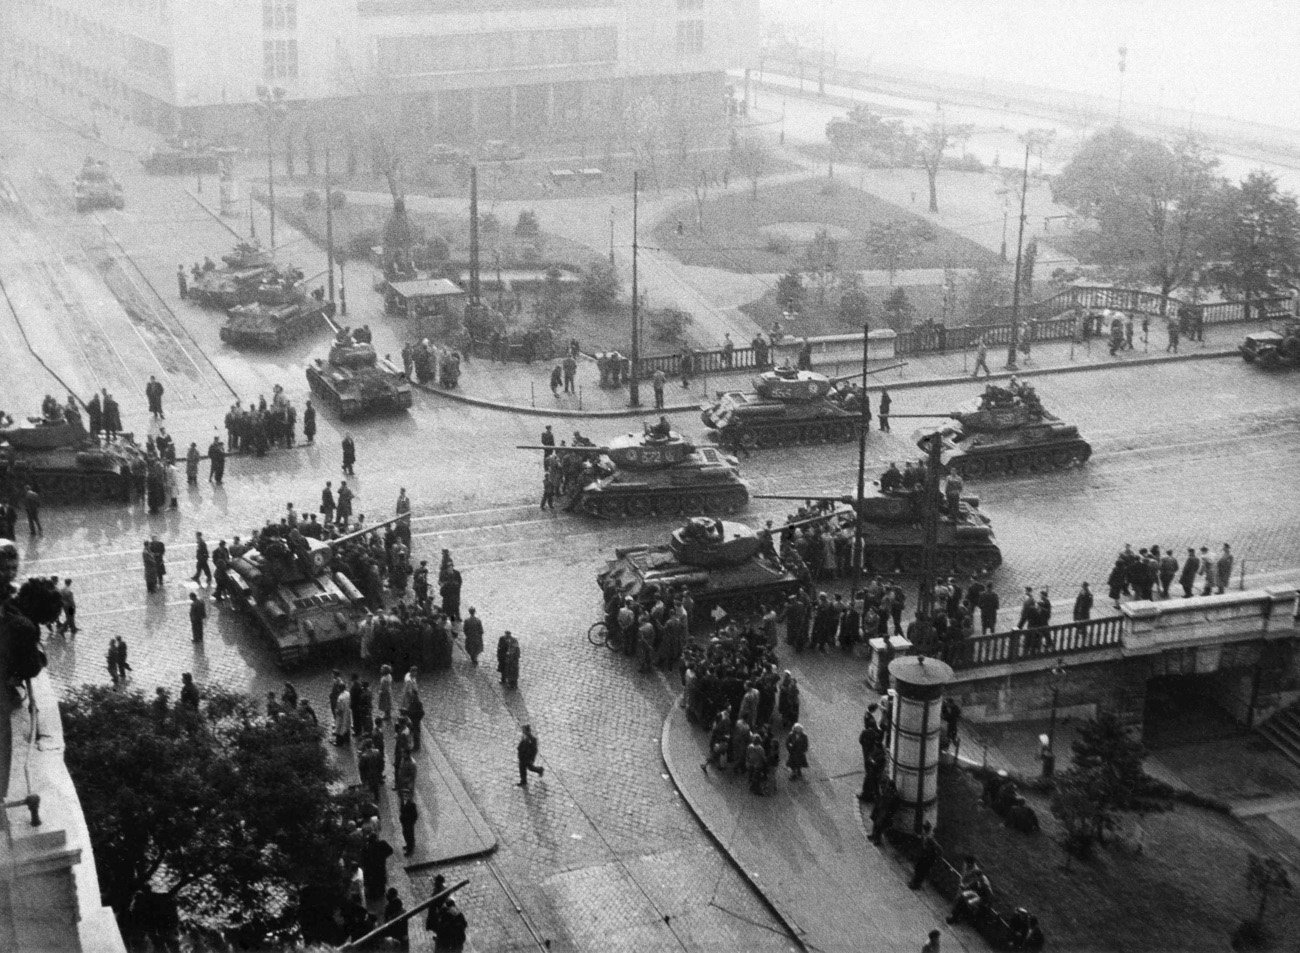 Dozens of Soviet tanks occupy the crossroads leading to the Danube Bridge during the Hungarian uprising in Budapest on 2 November 1956.